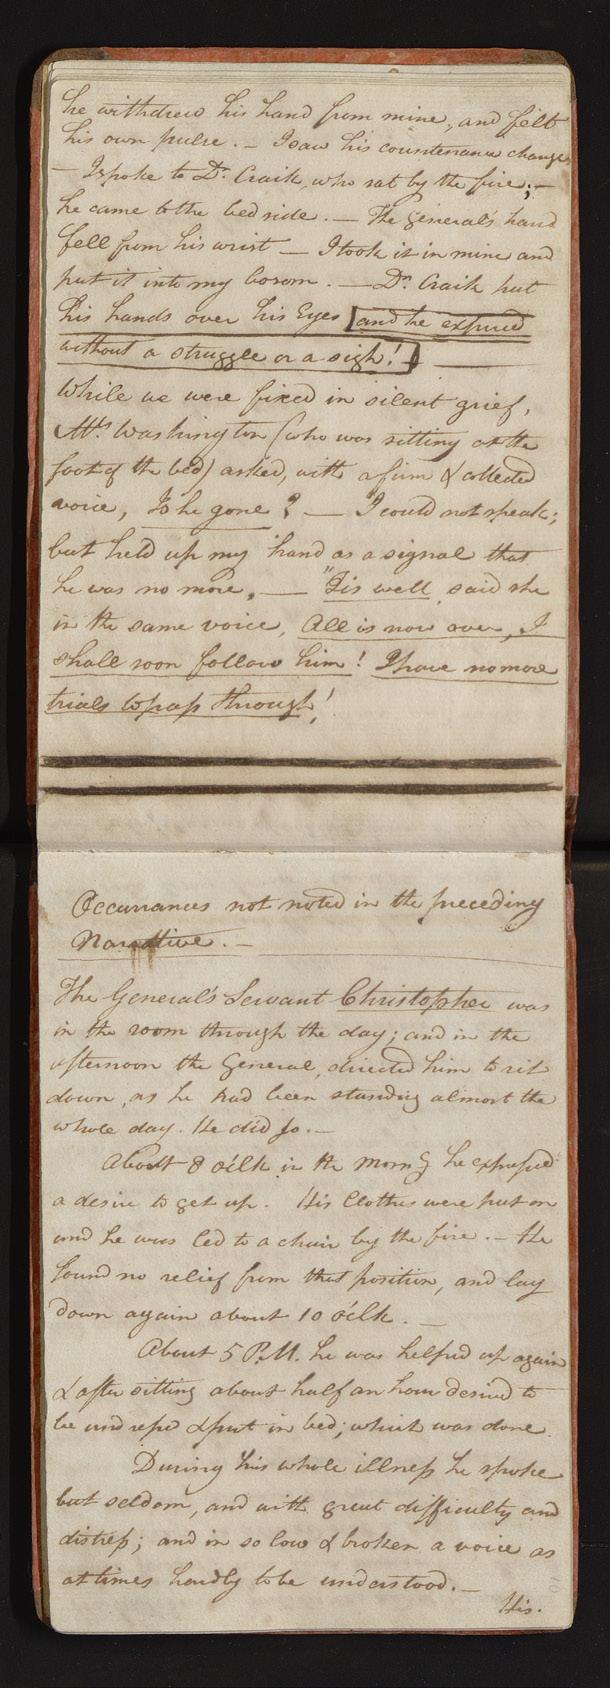 Diary Documenting Washington s Death Gets New Life It was the middle of December 1799 when George Washington s personal secretary, Tobias Lear, recorded the president s last moments of life in stark